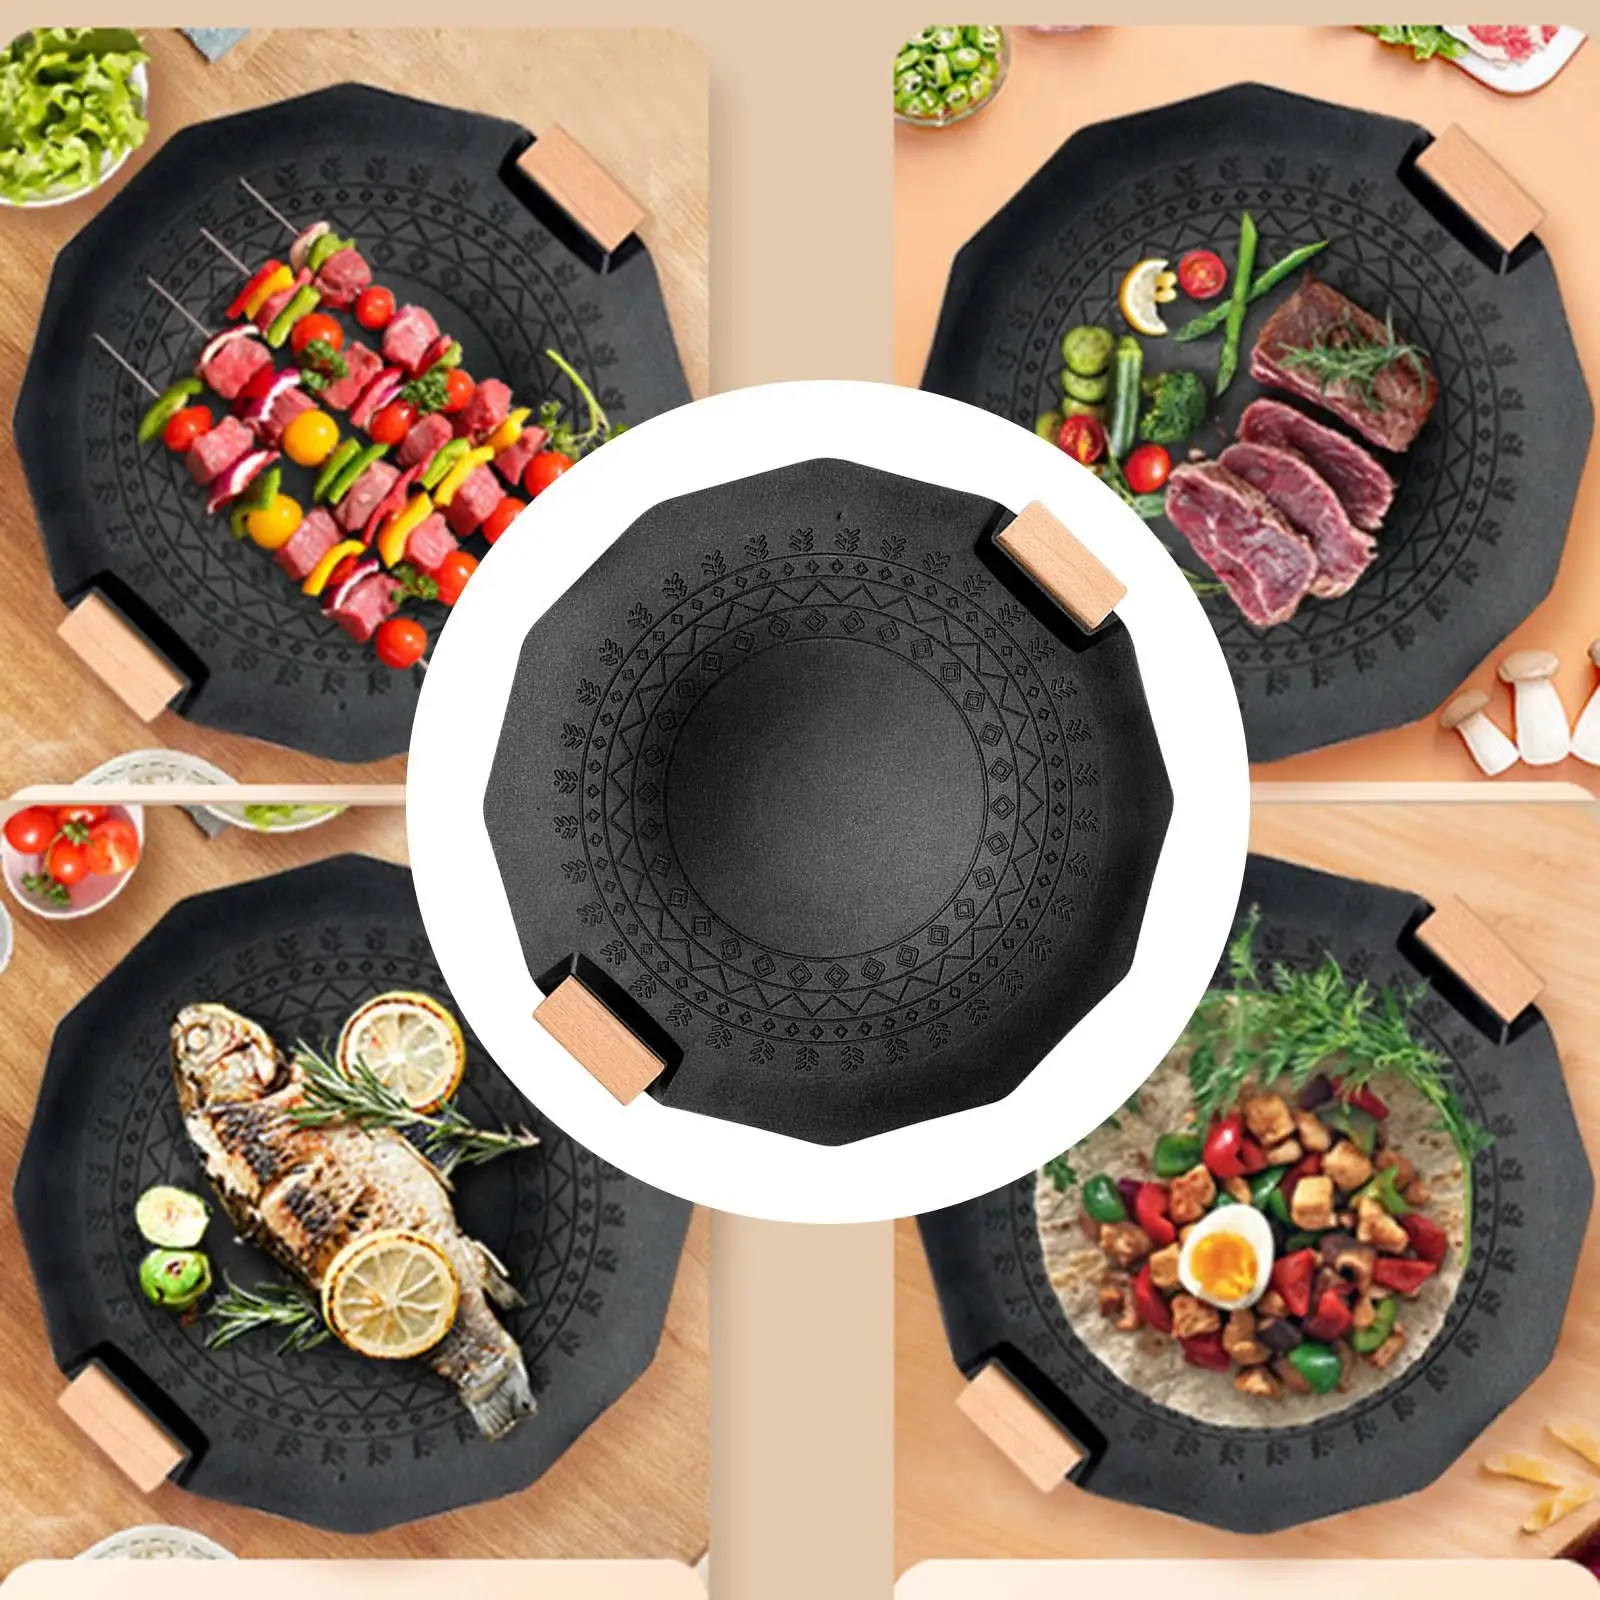 https://ae01.alicdn.com/kf/S27f2f8e12d54417f8fcb48c44b7a4036C/Outdoor-Frying-Pan-14-Camping-Grill-Plate-Reusable-Round-Household-BBQ-Grill-Tray-for-Frying-Grill.jpg